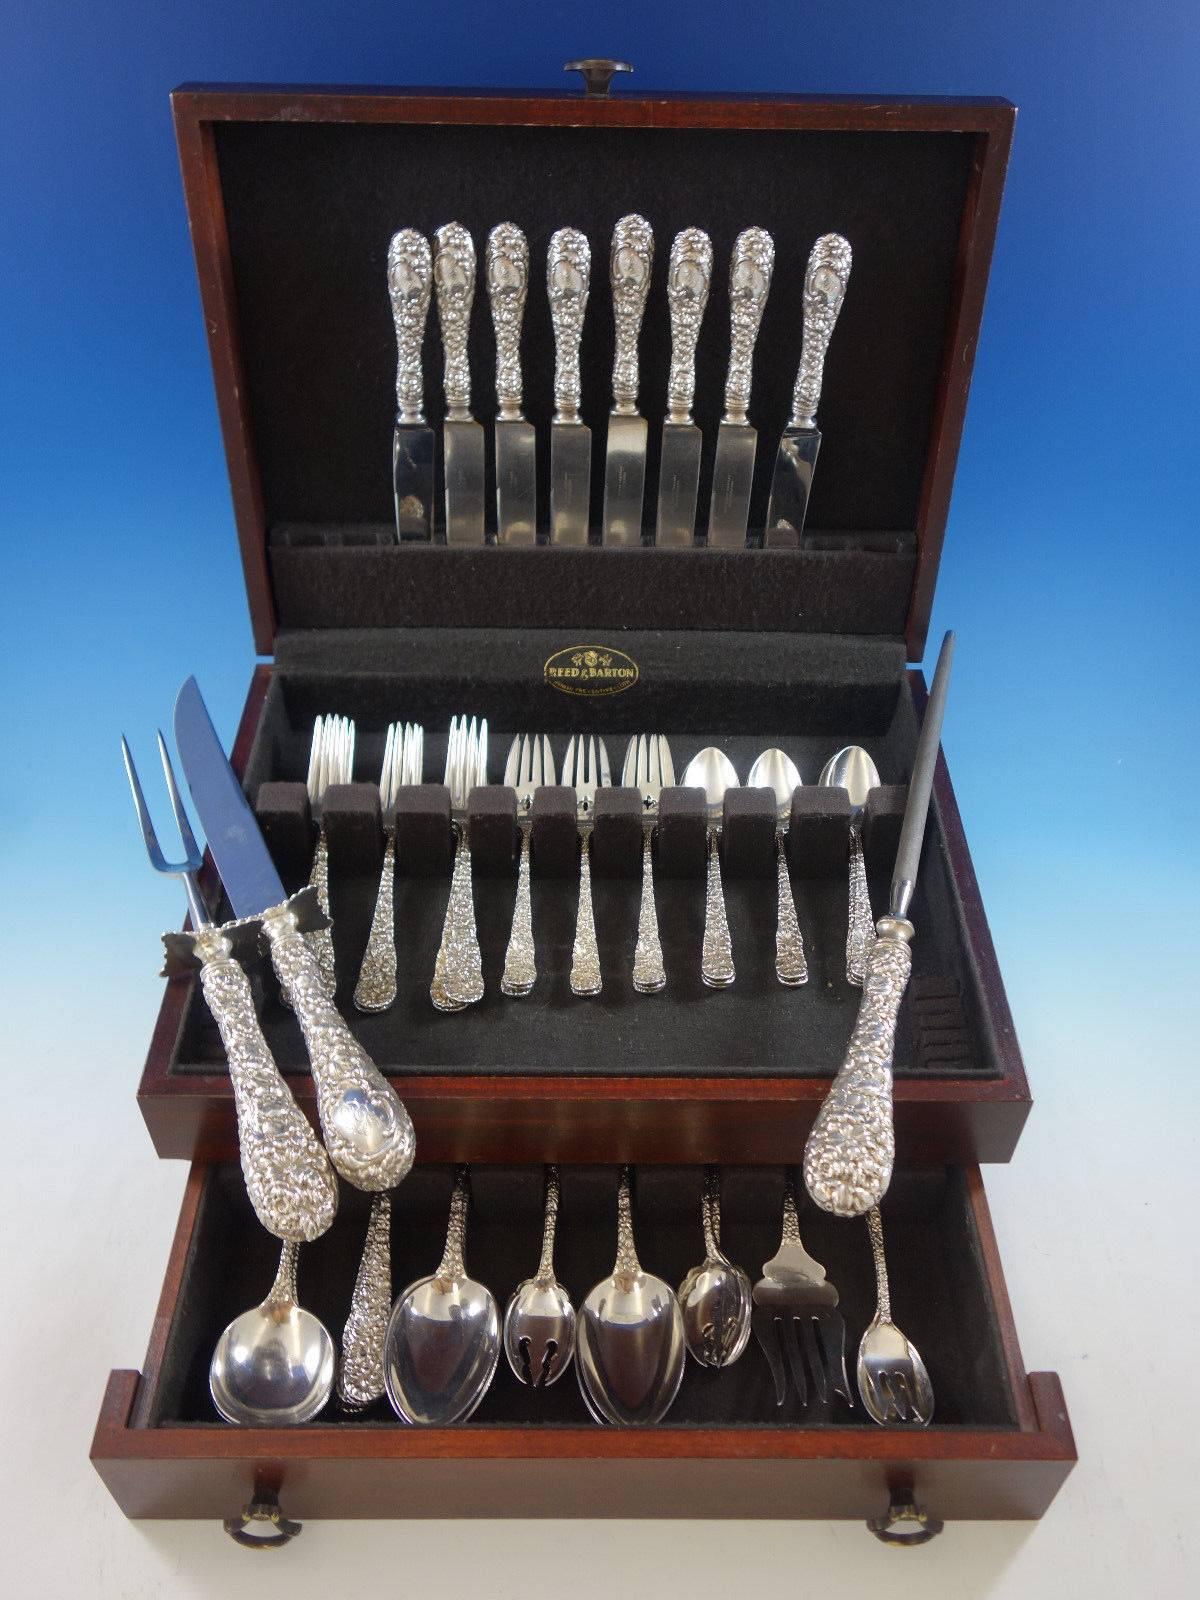 Chrysanthemum by Stieff sterling silver flatware set, 62 pieces. This set includes: 

Eight knives, six- blunt blade, two-French blade, 8 7/8